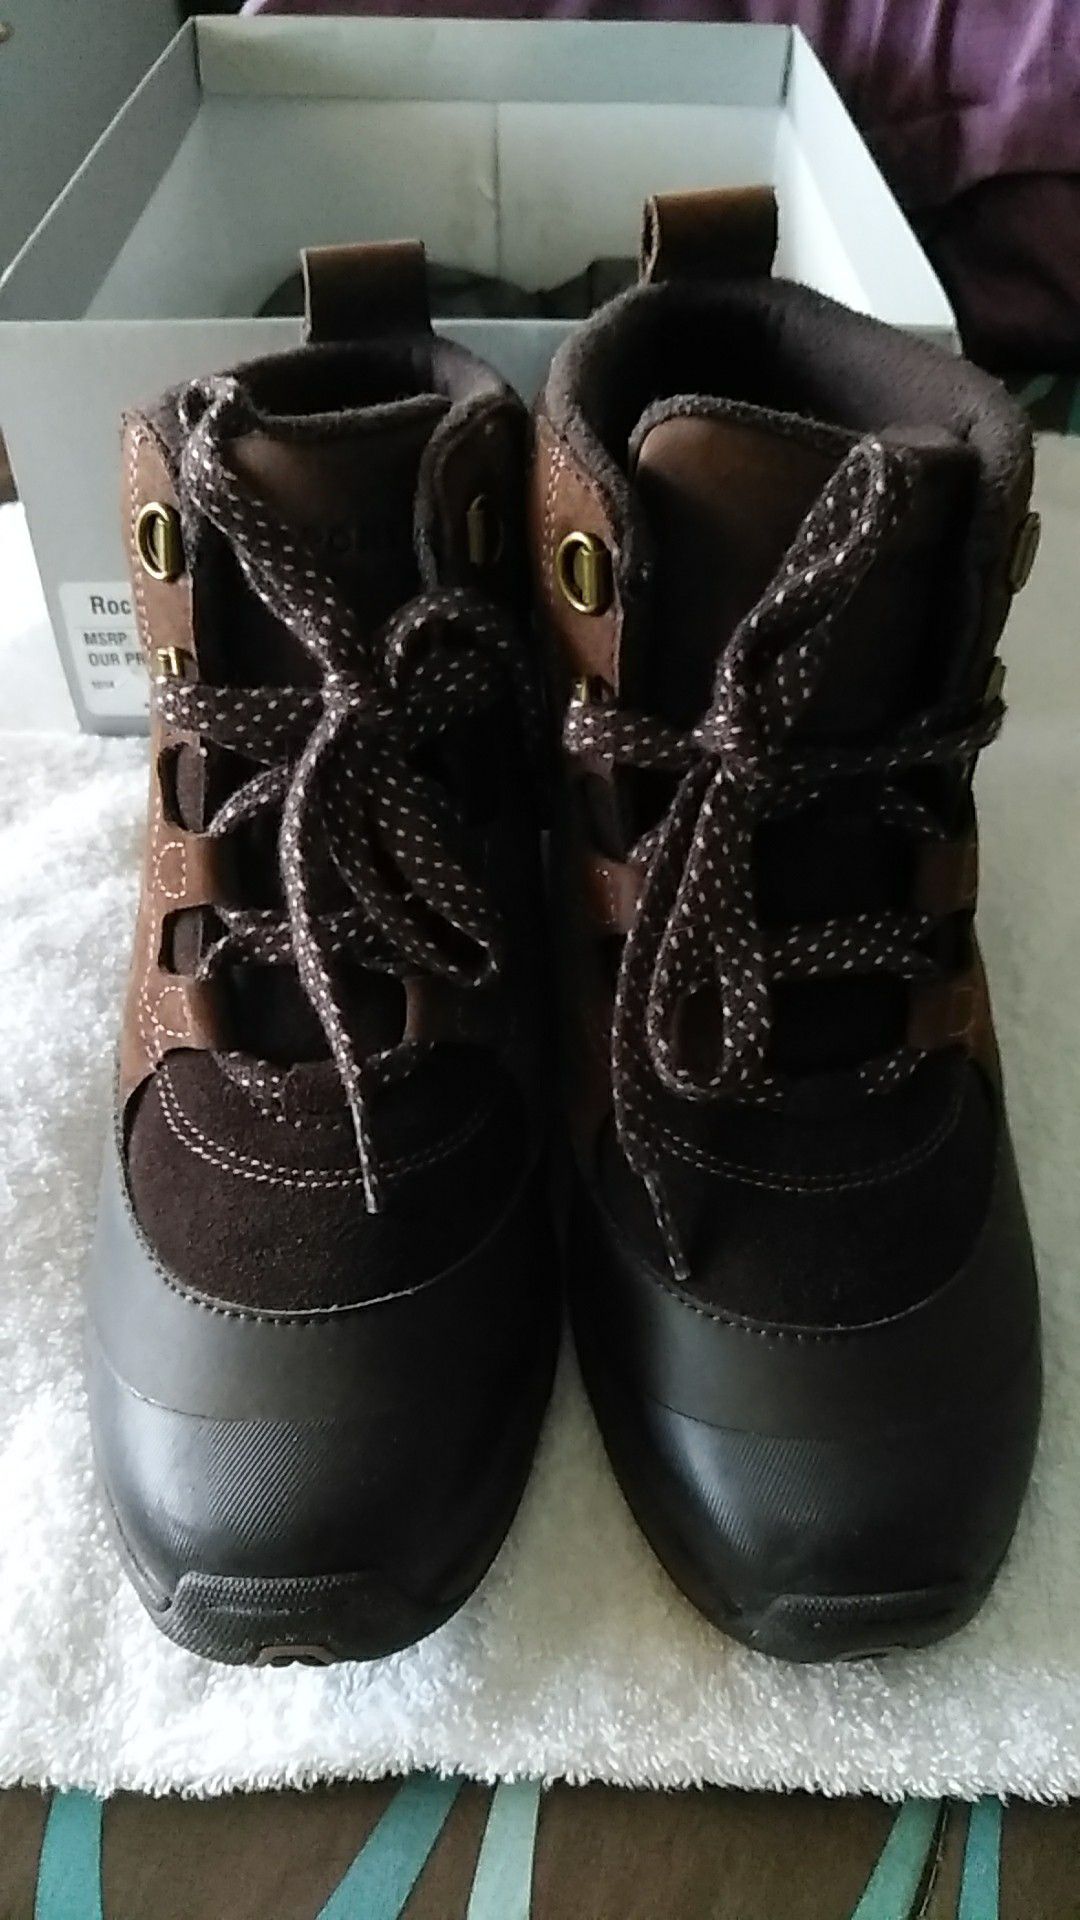 Boots rockport styled by adidas unique style and super comfortable. size 9